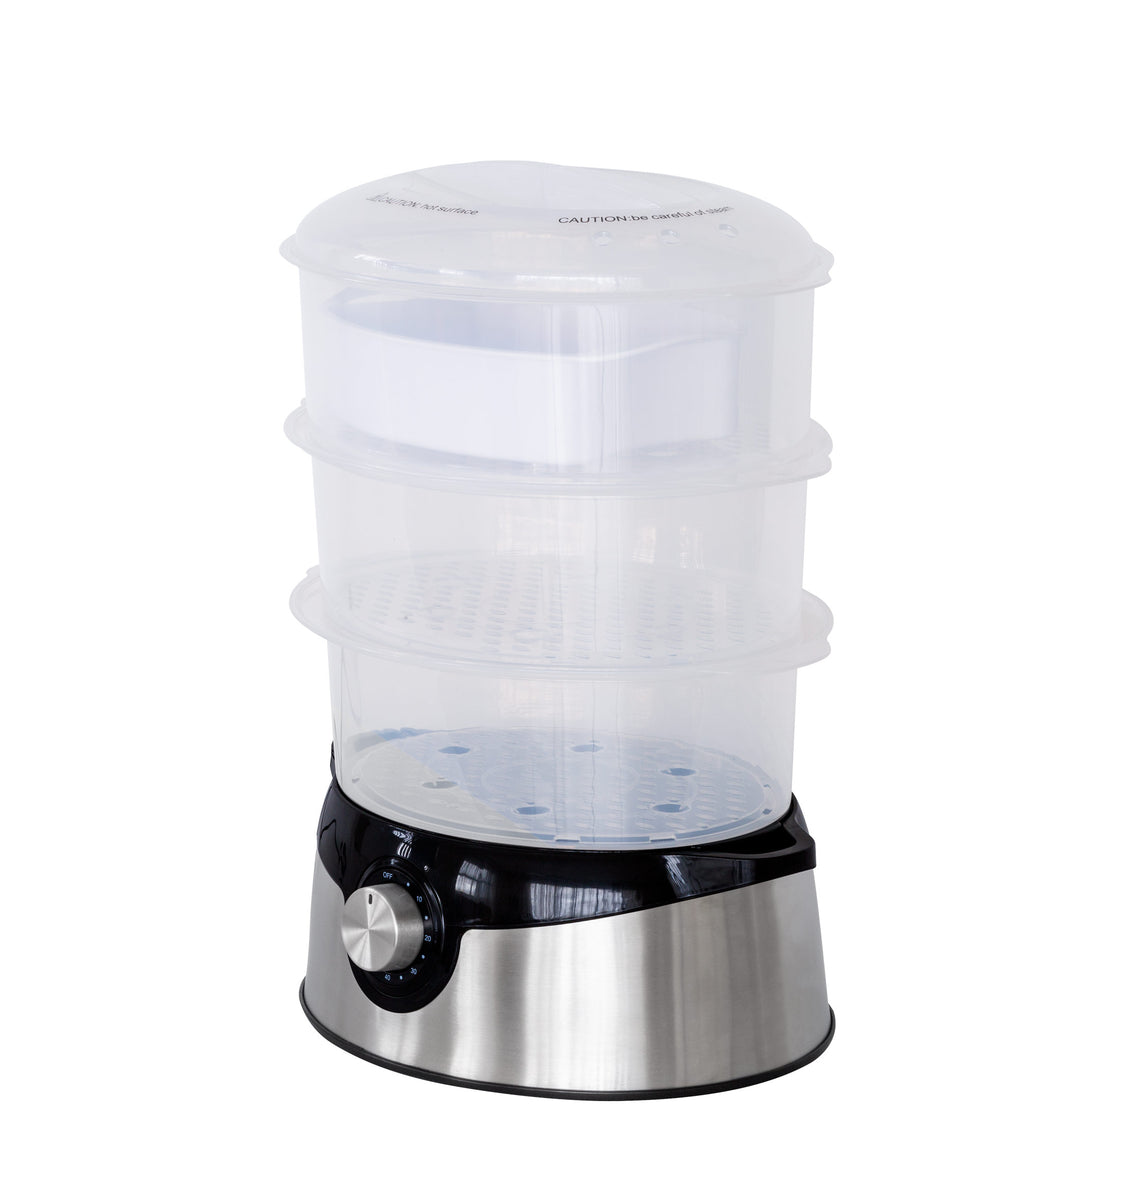 3 Tier Food Steamer with Stainless Steel Base and rice bowl.